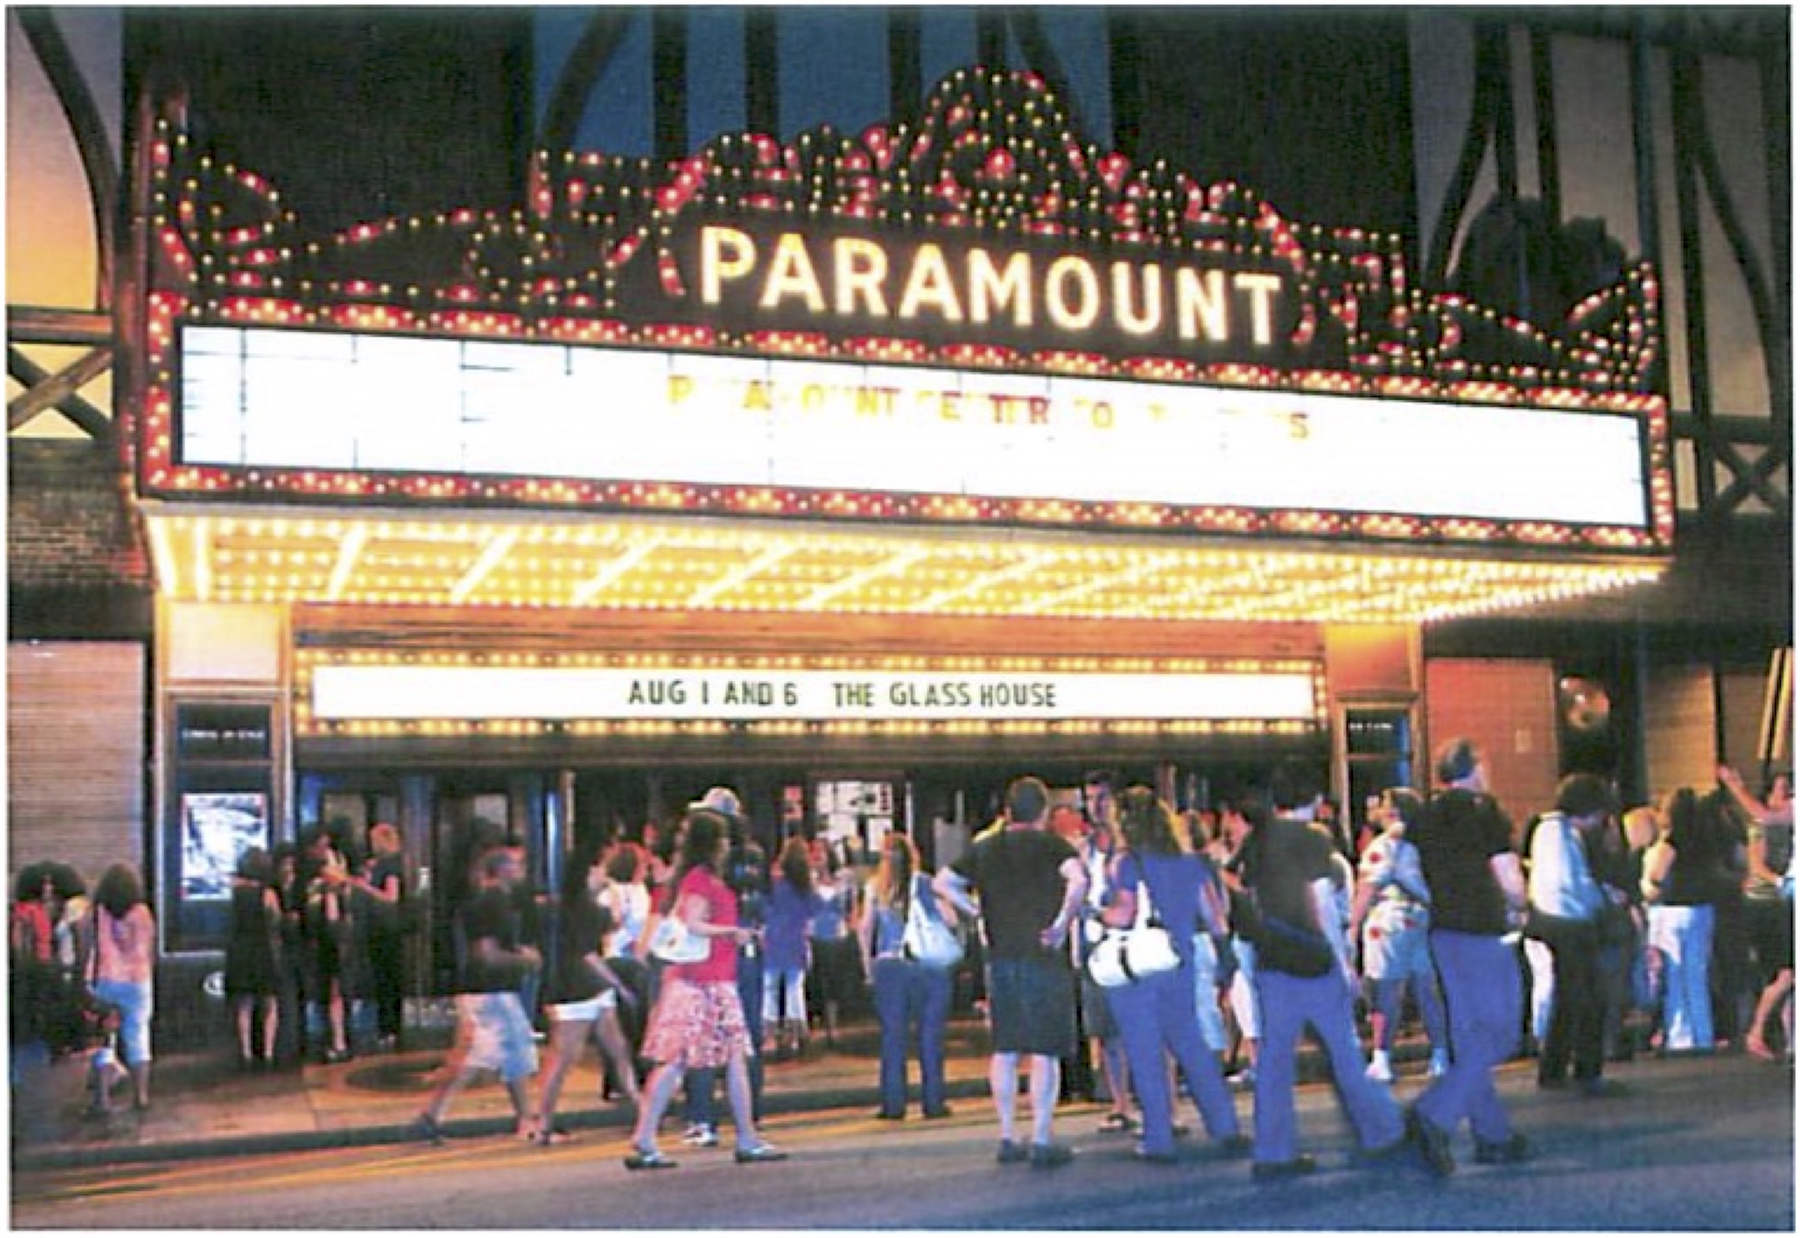 The Paramount Theater in Peekskill, N.Y.